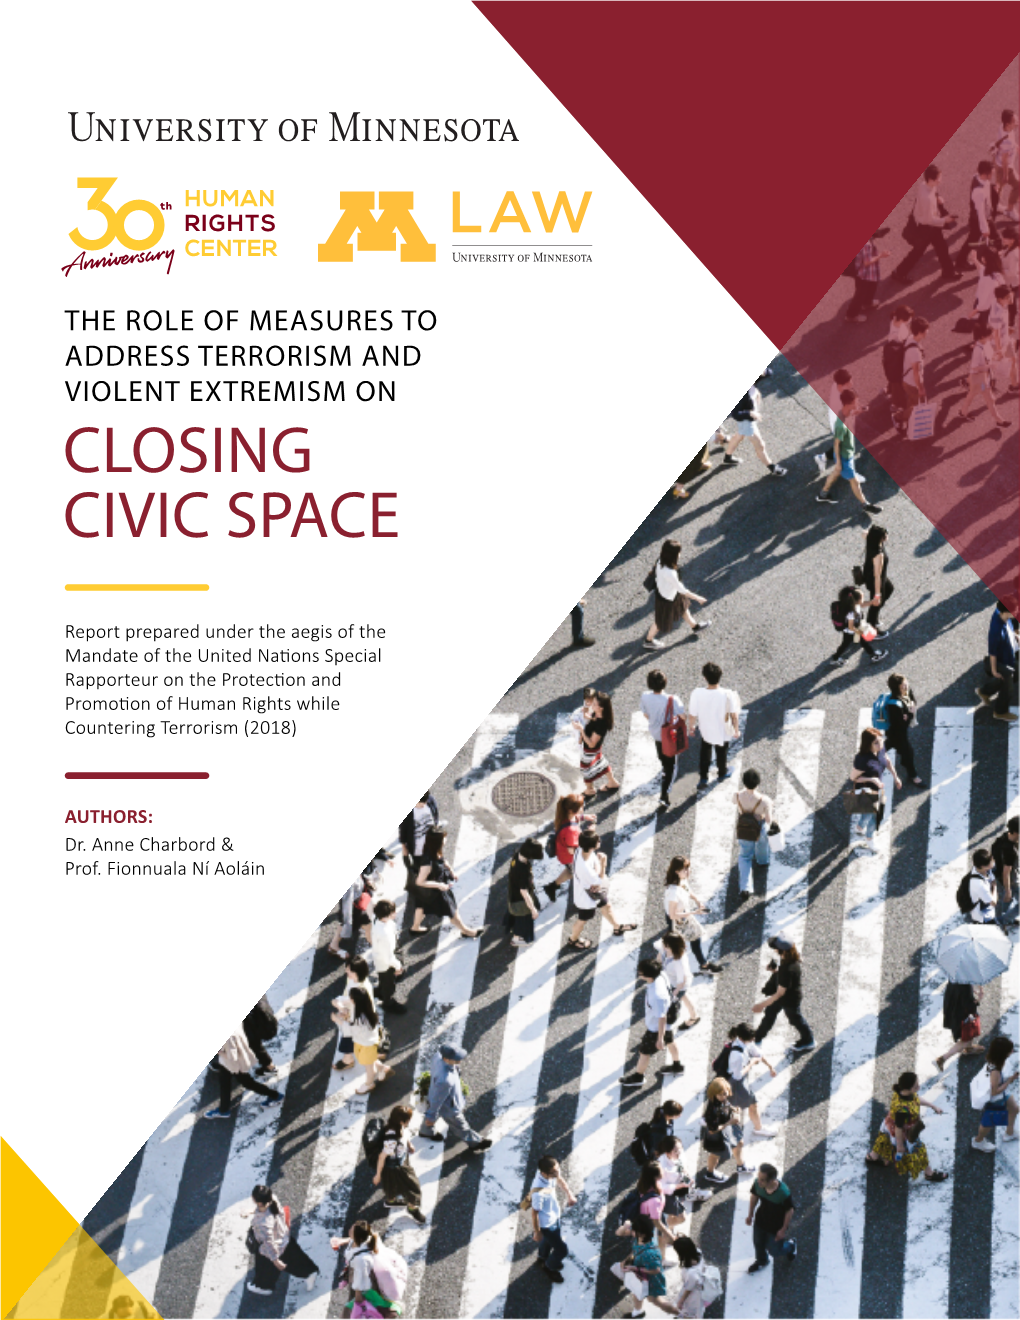 The Role of Measures to Address Terrorism and Violent Extremism on Closing Civic Space